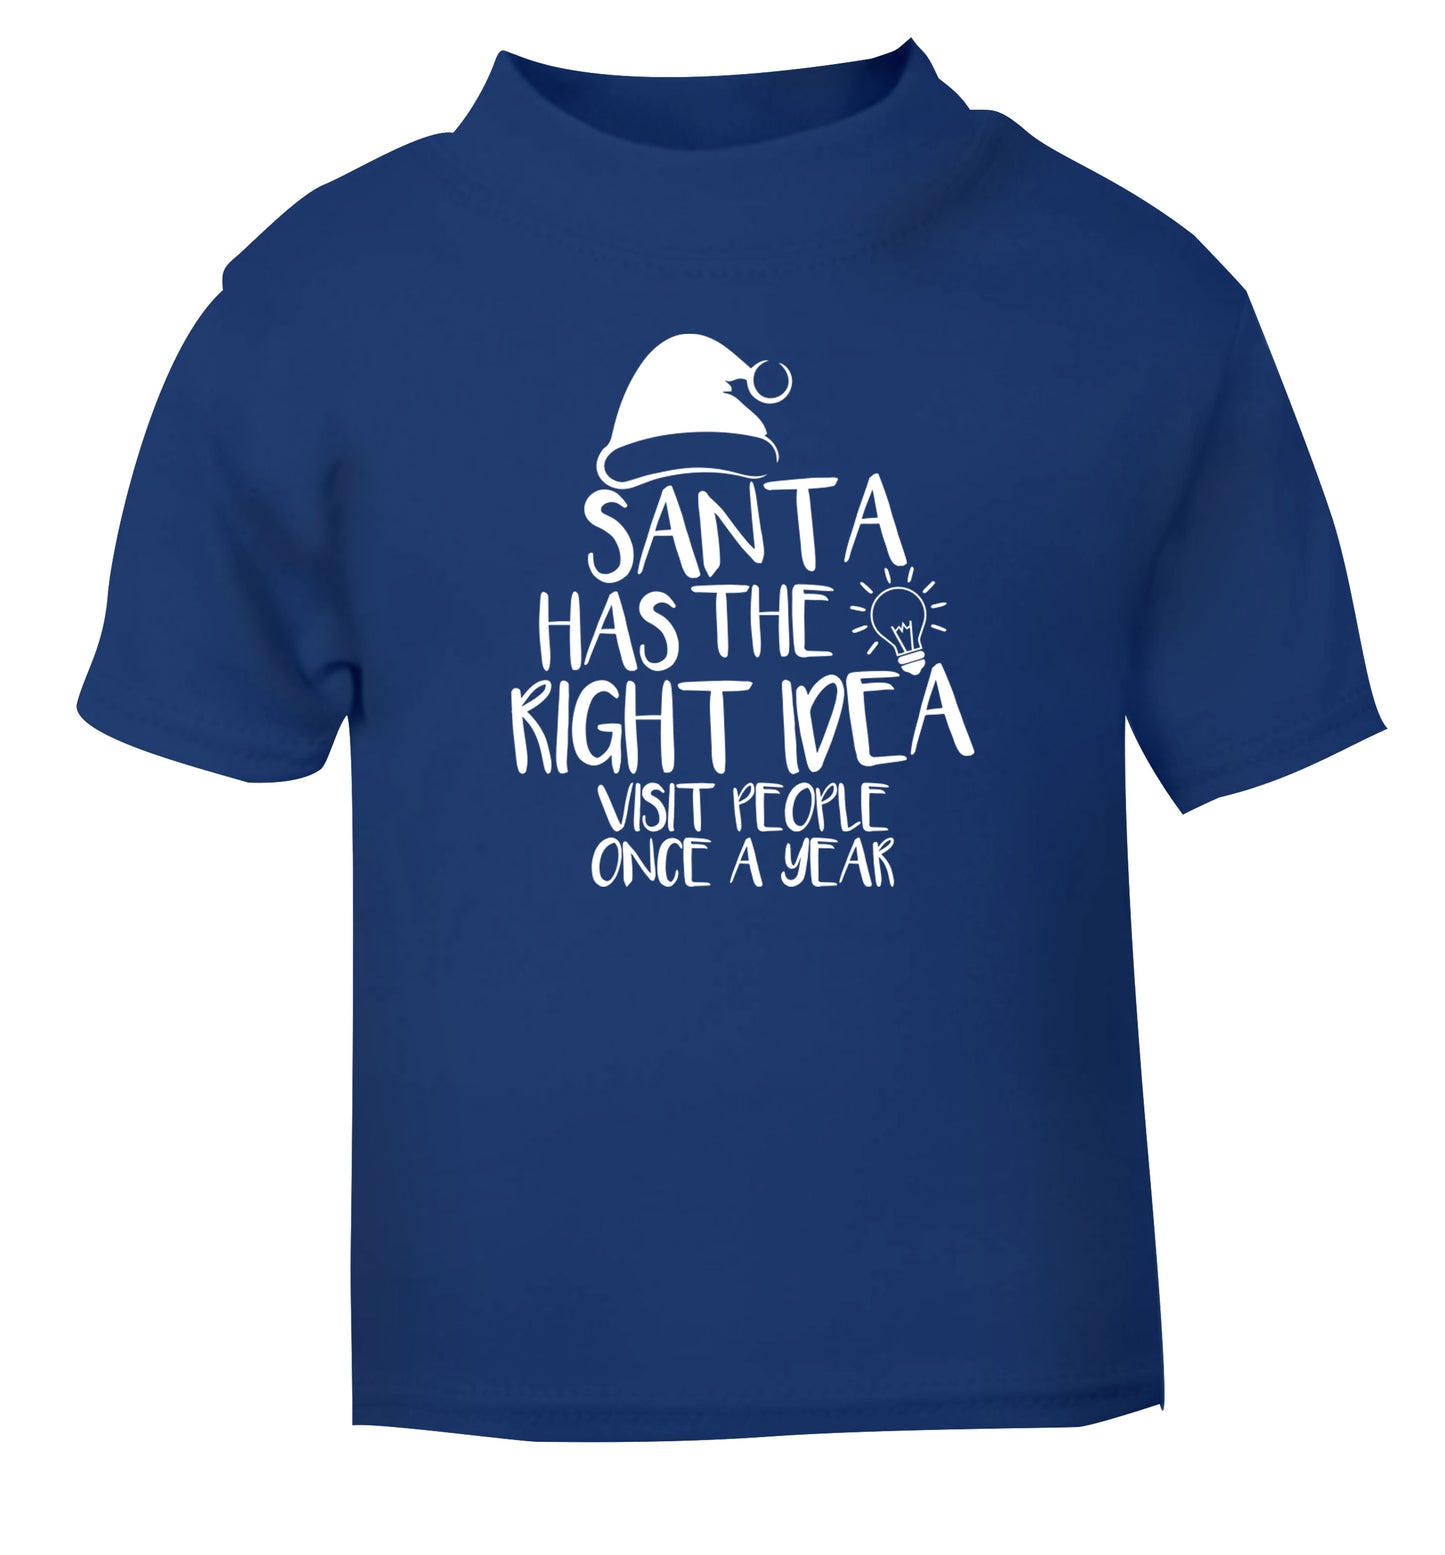 Santa has the right idea visit people once a year blue Baby Toddler Tshirt 2 Years